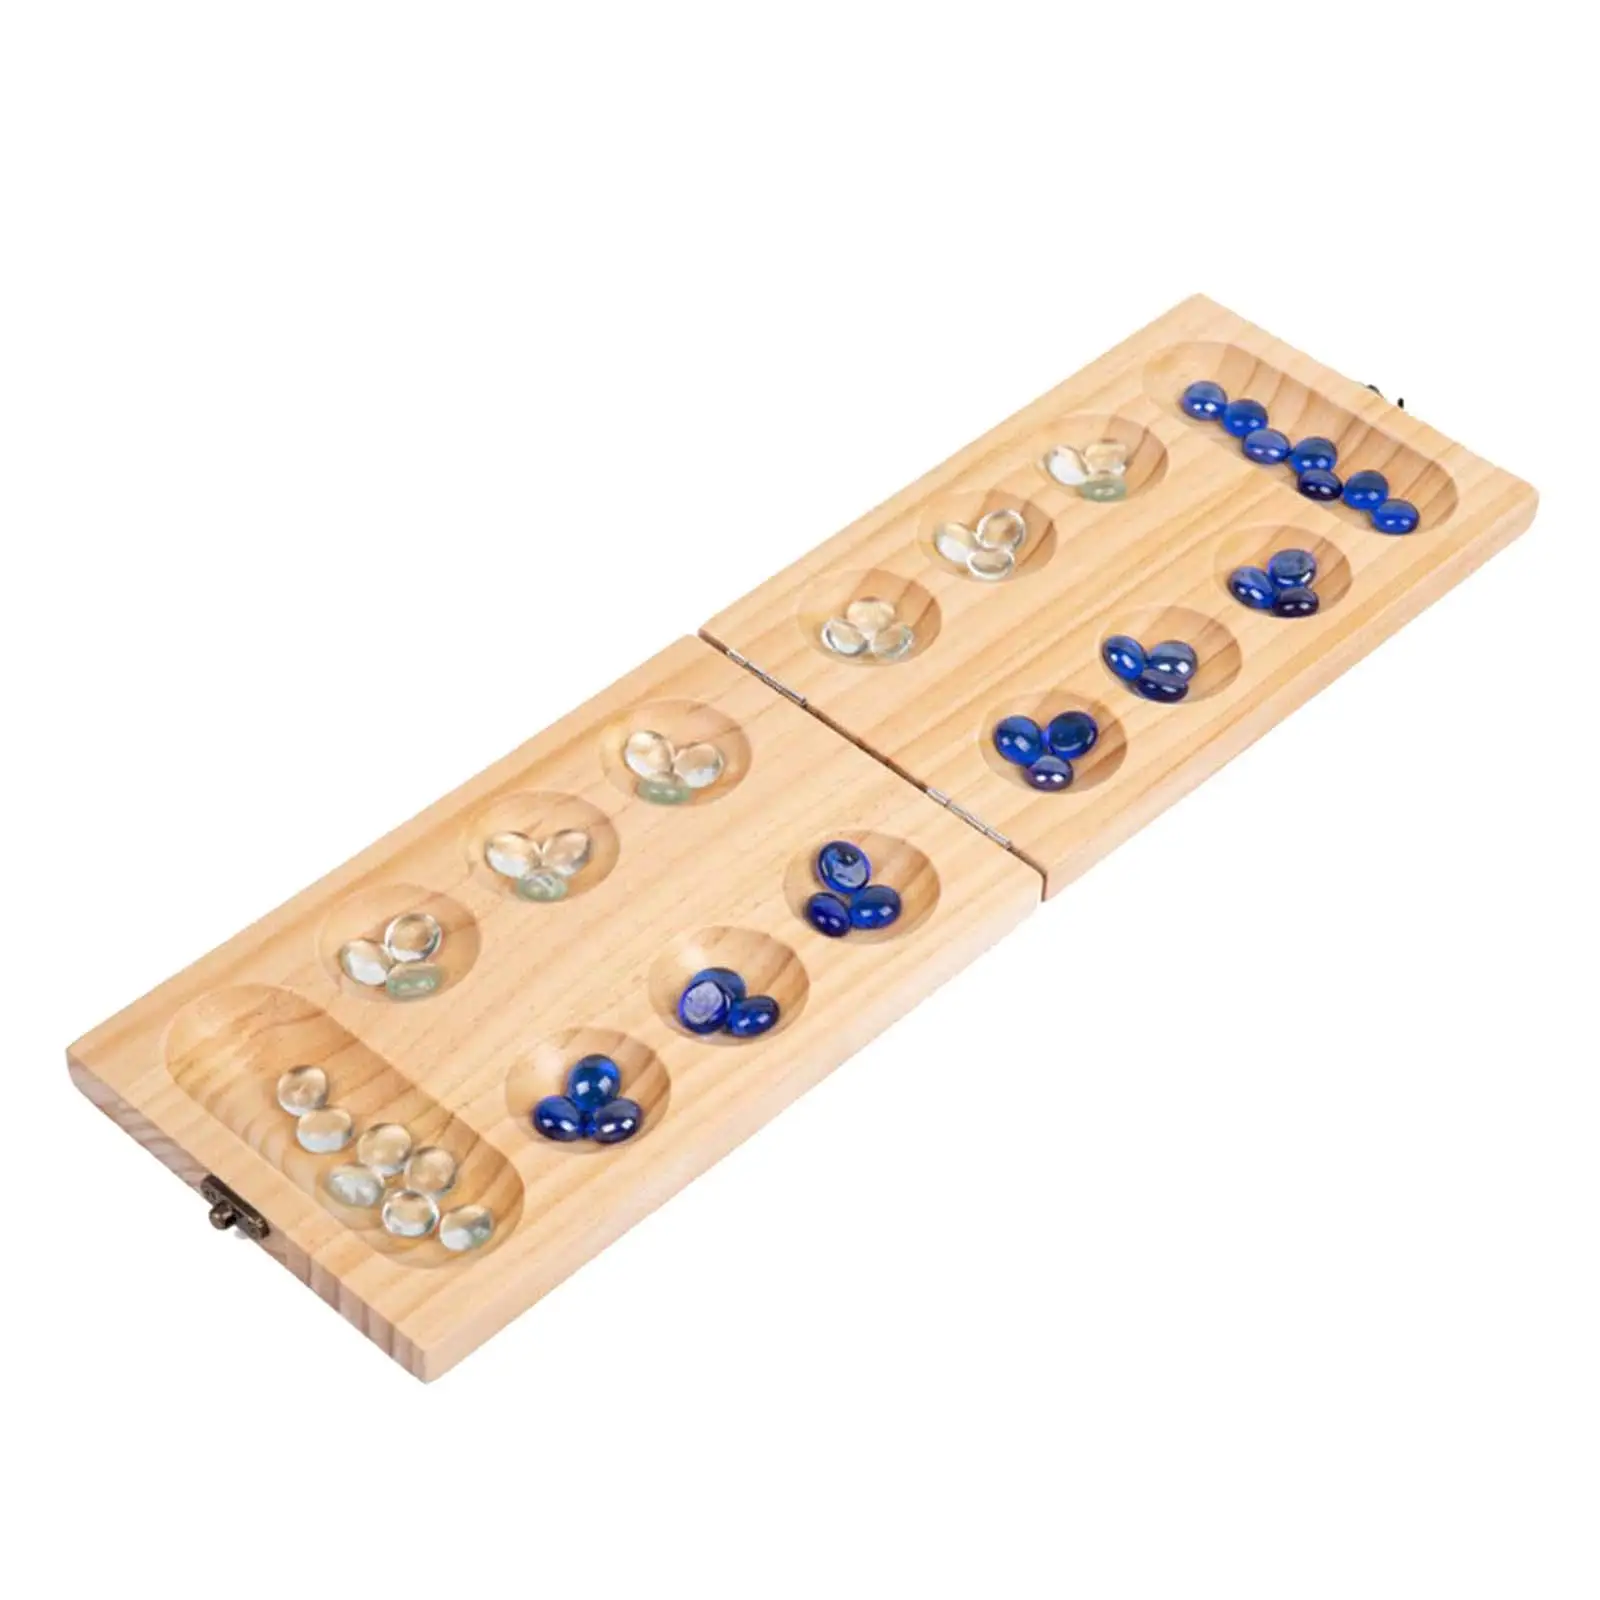 Wooden Folding Mancala Board Game Set with 48 Beads 2 Player Game for Teen Entertainment Travel Party Adult Kids